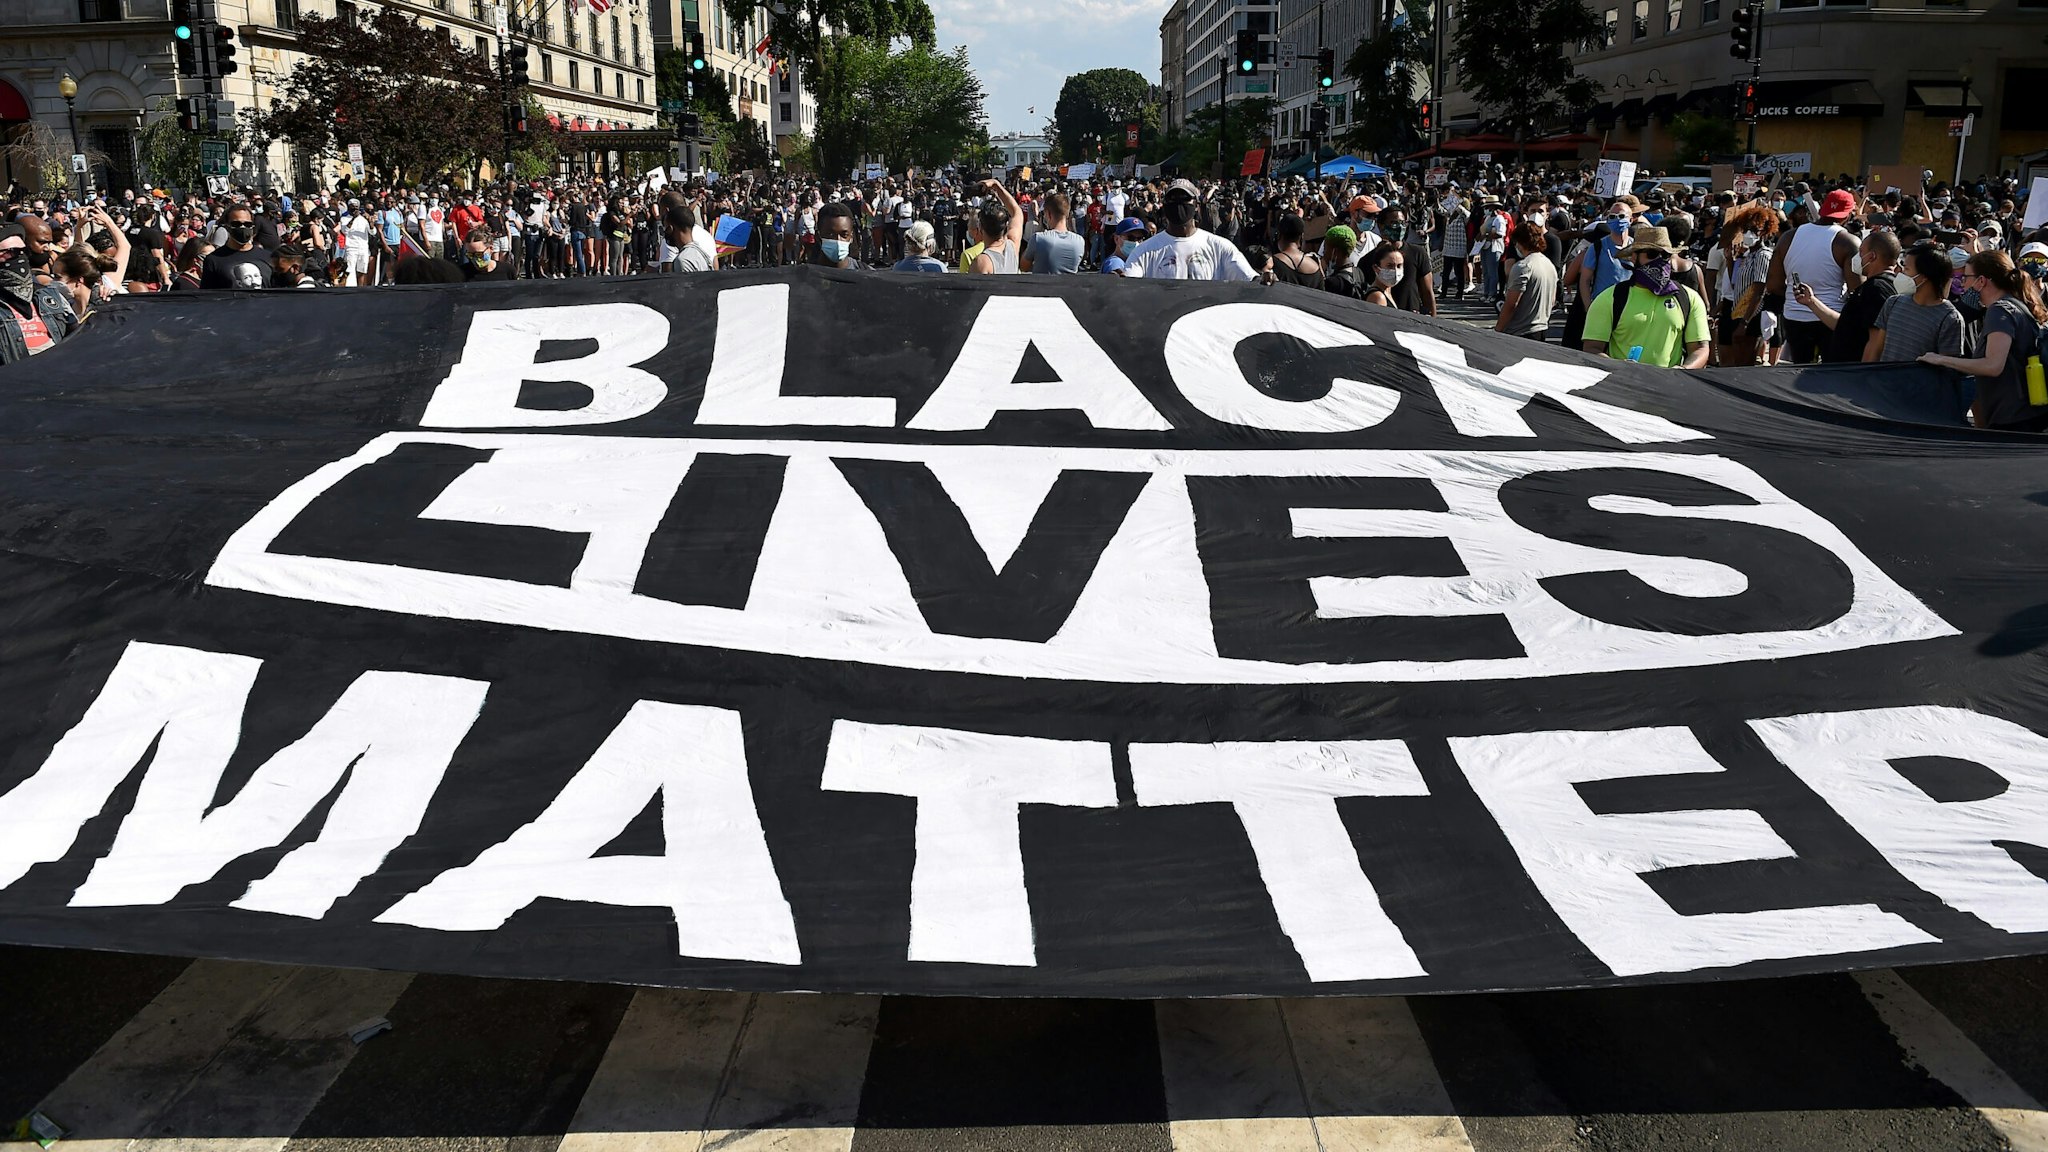 Demonstrators deploy a " Black Lives Matter" banner near the White House during a demonstration against racism and police brutality, in Washington, DC on June 6, 2020. - Demonstrations are being held across the US following the death of George Floyd on May 25, 2020, while being arrested in Minneapolis, Minnesota.